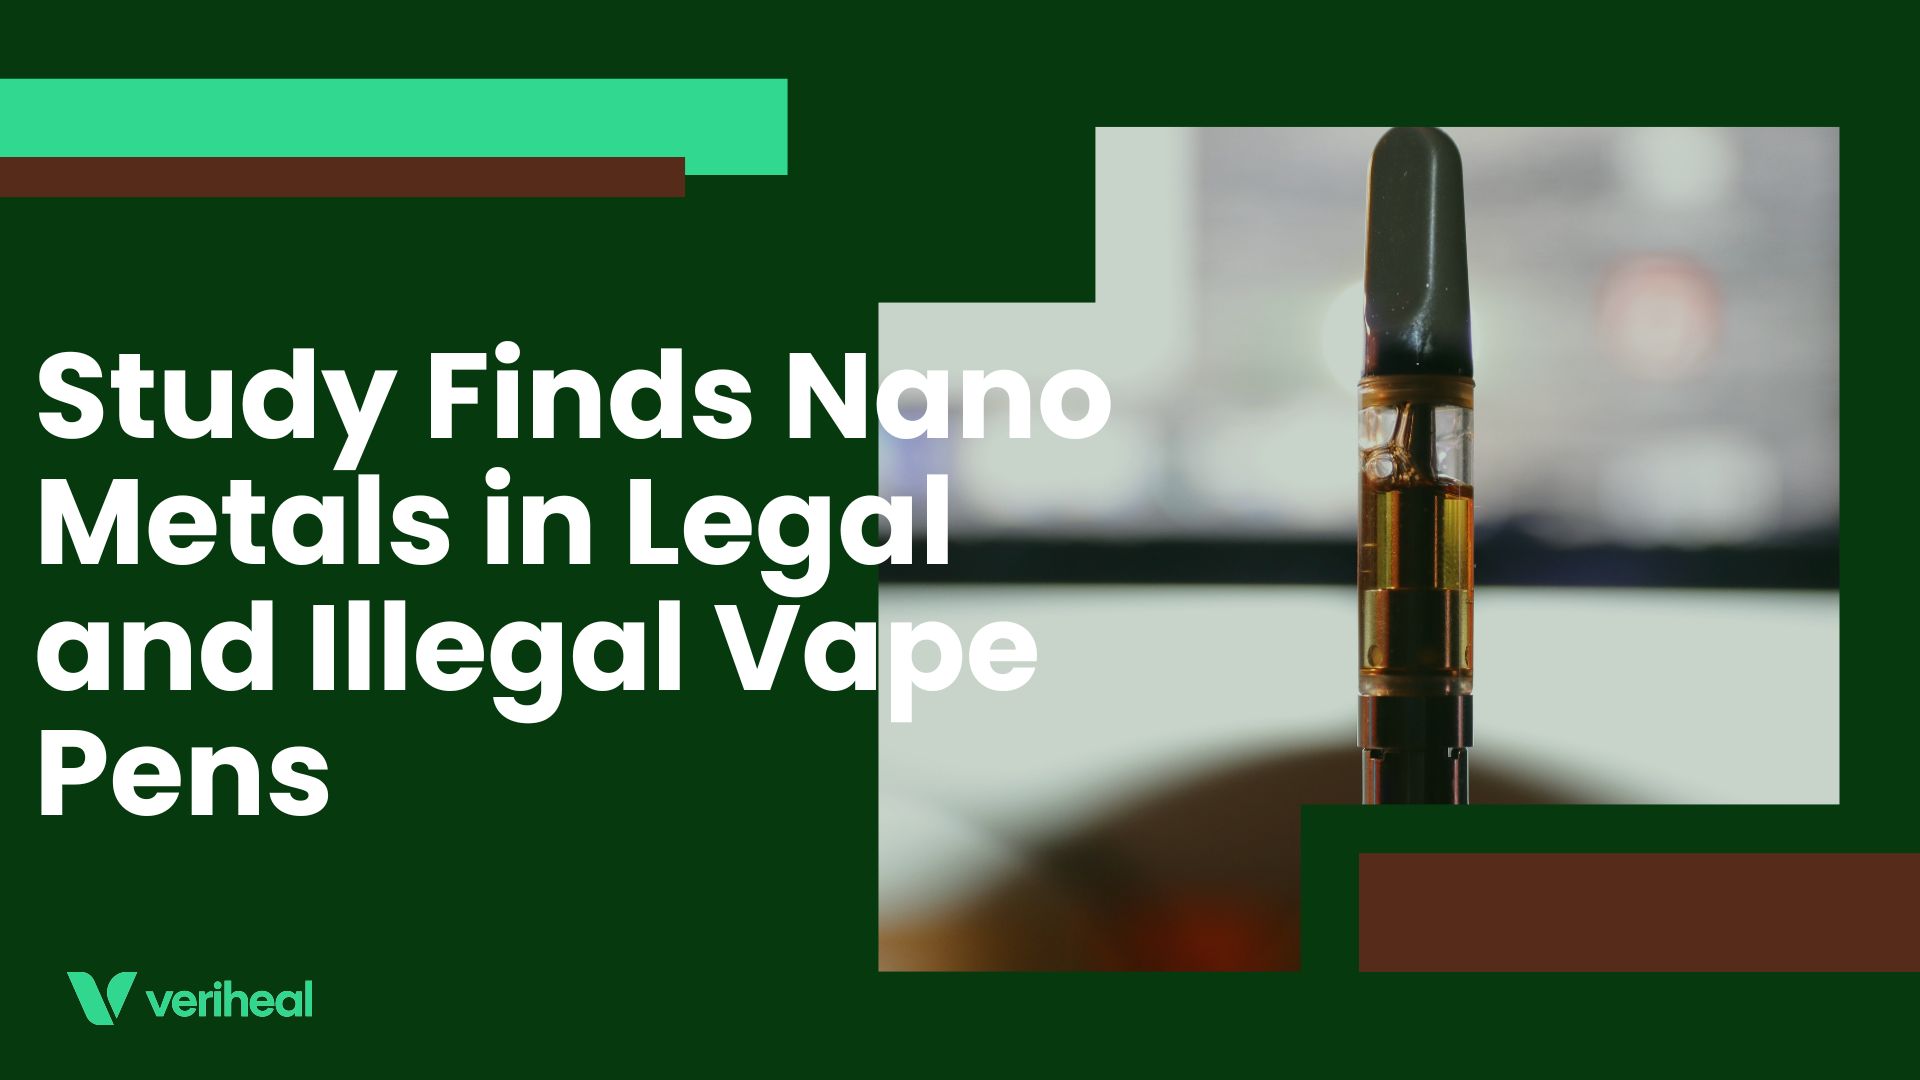 Study Finds Nano Metals in Legal and Illegal Vape Pens